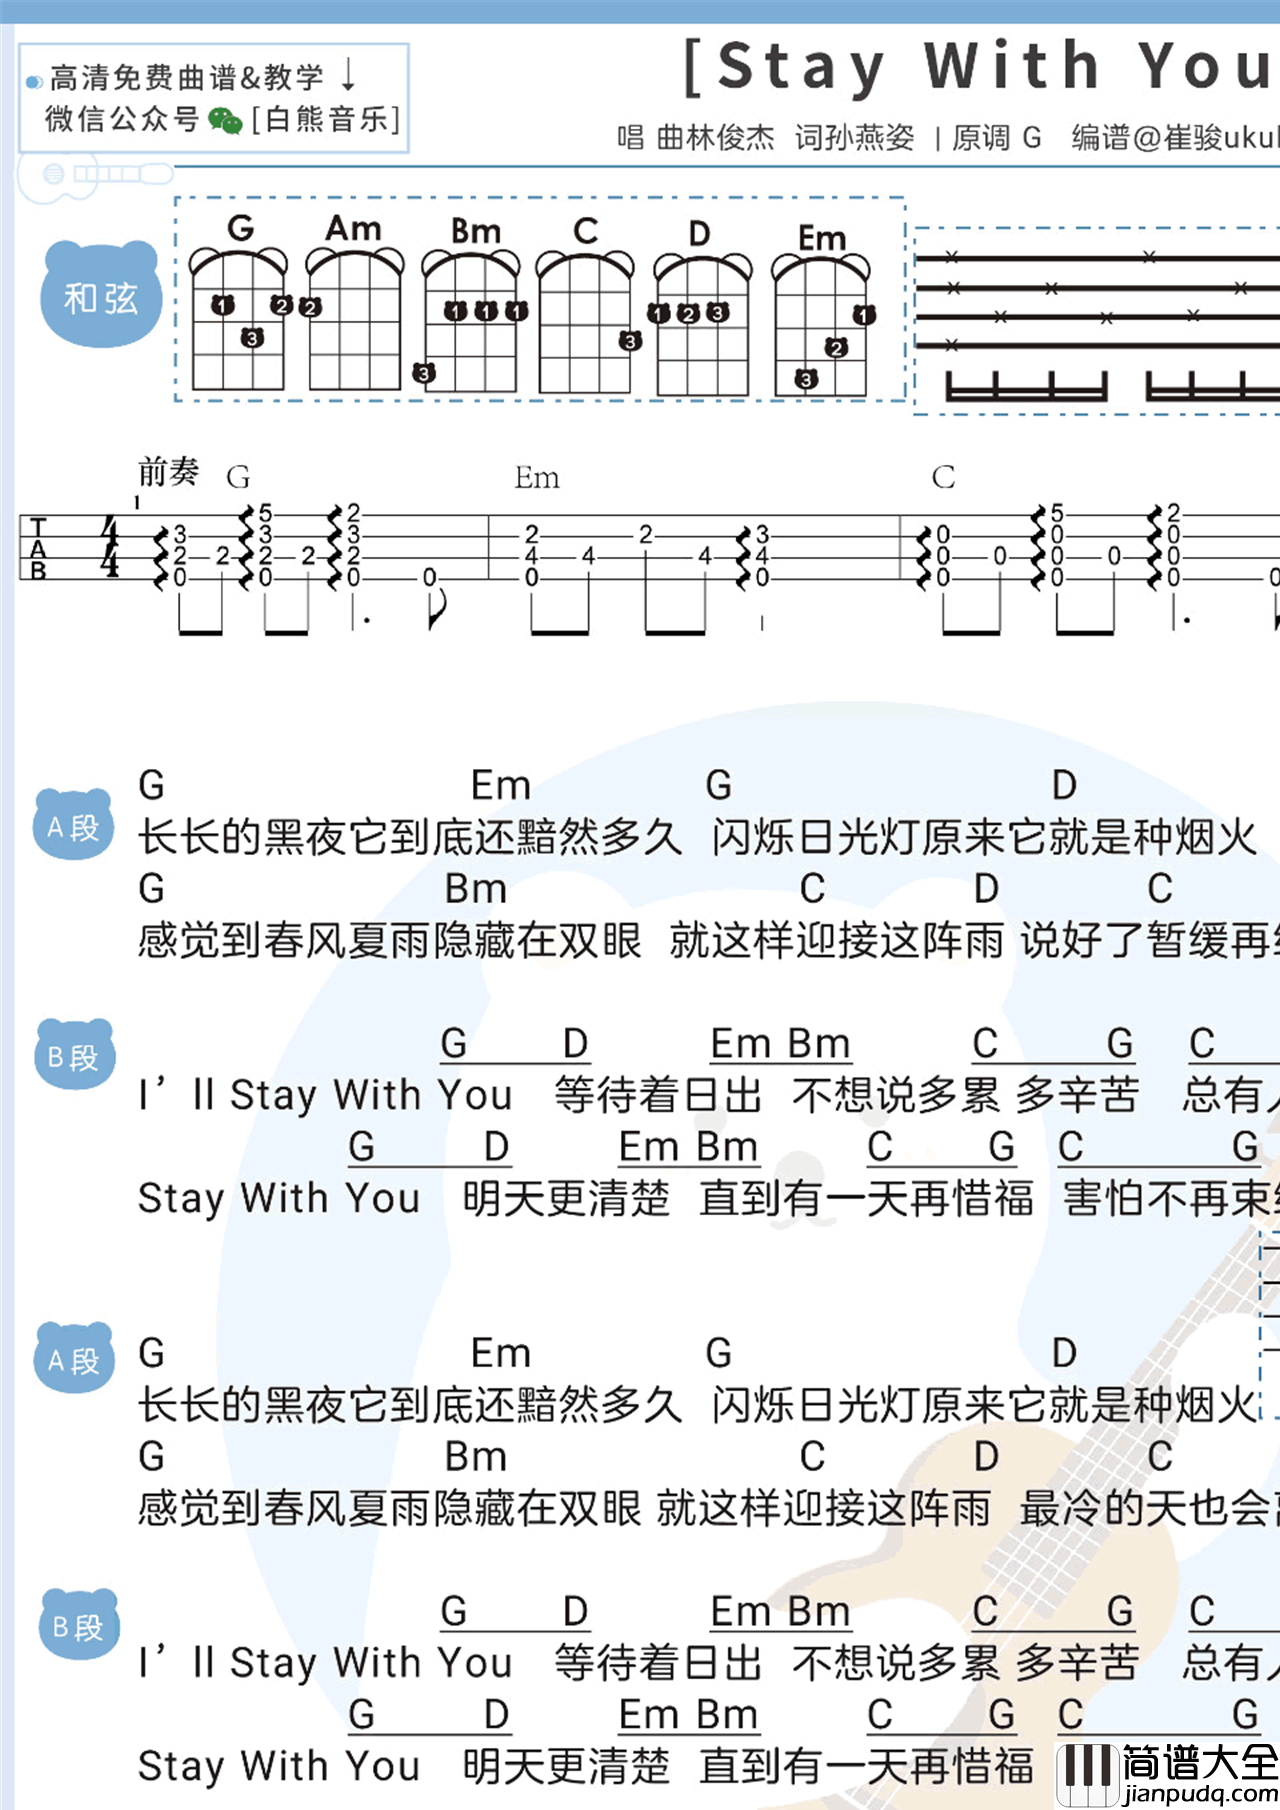 Stay_With_You吉他谱_林俊杰/孙燕姿_弹唱图片谱